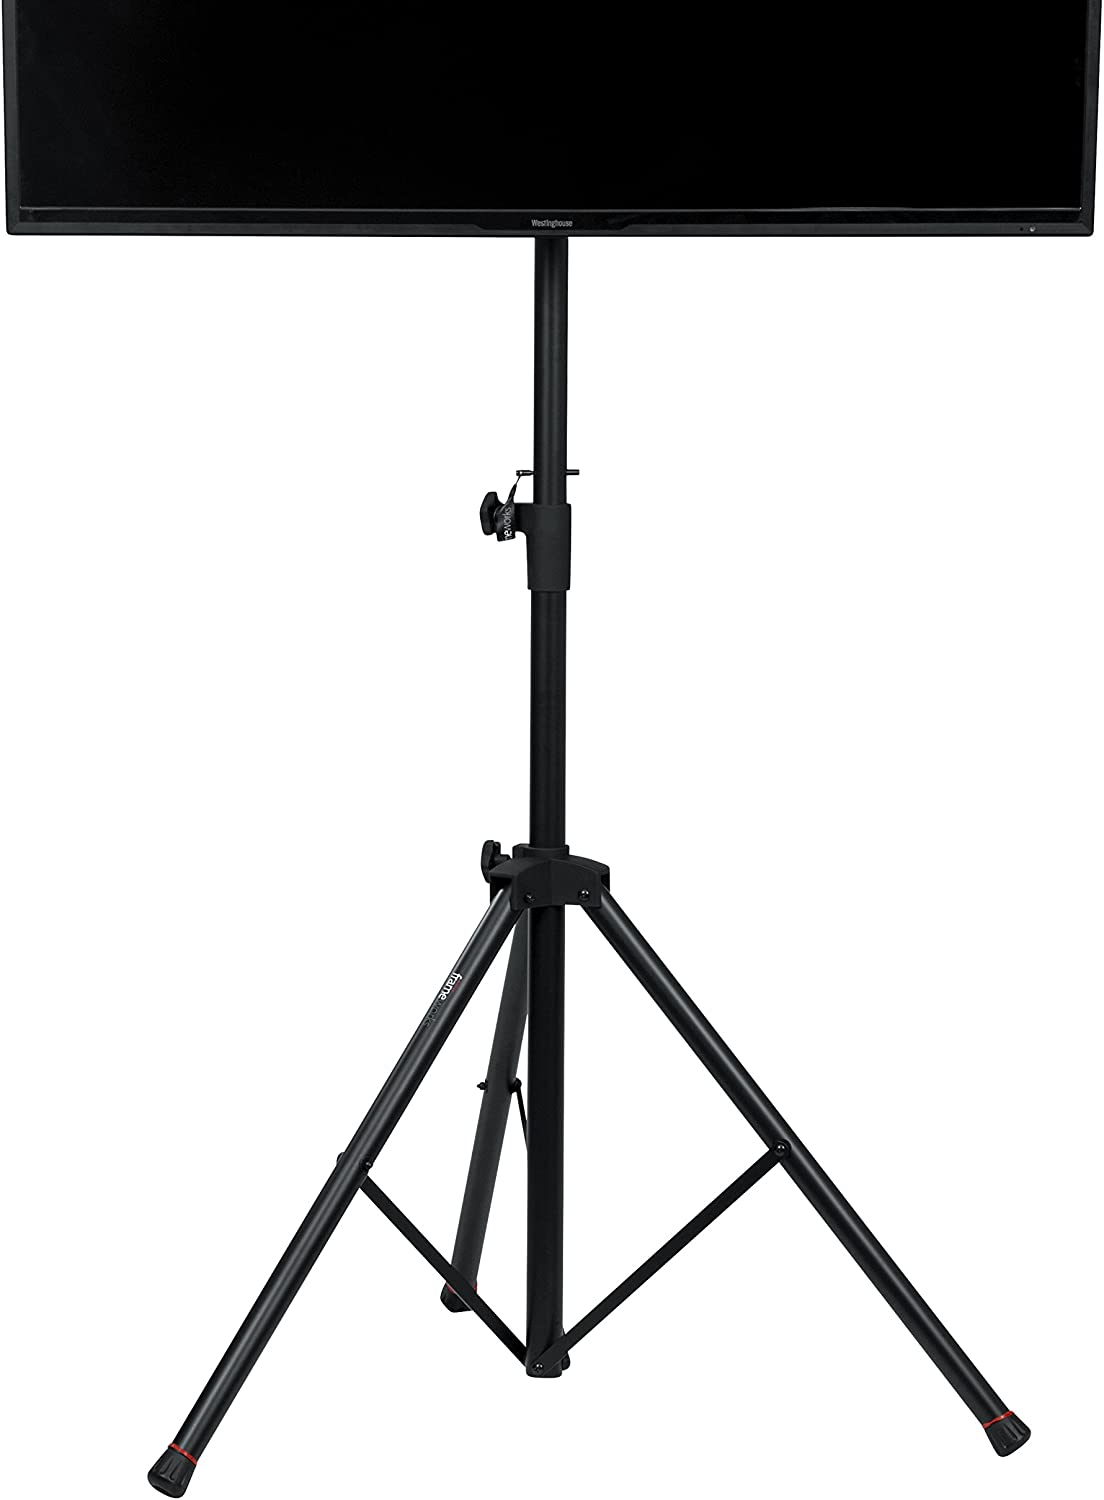 Gator Frameworks Standard Adjustable Tripod LCD/LED TV Monitor stand for Screens up to 48-Inch - GFW-AV-LCD-1 - Pro-Distributing